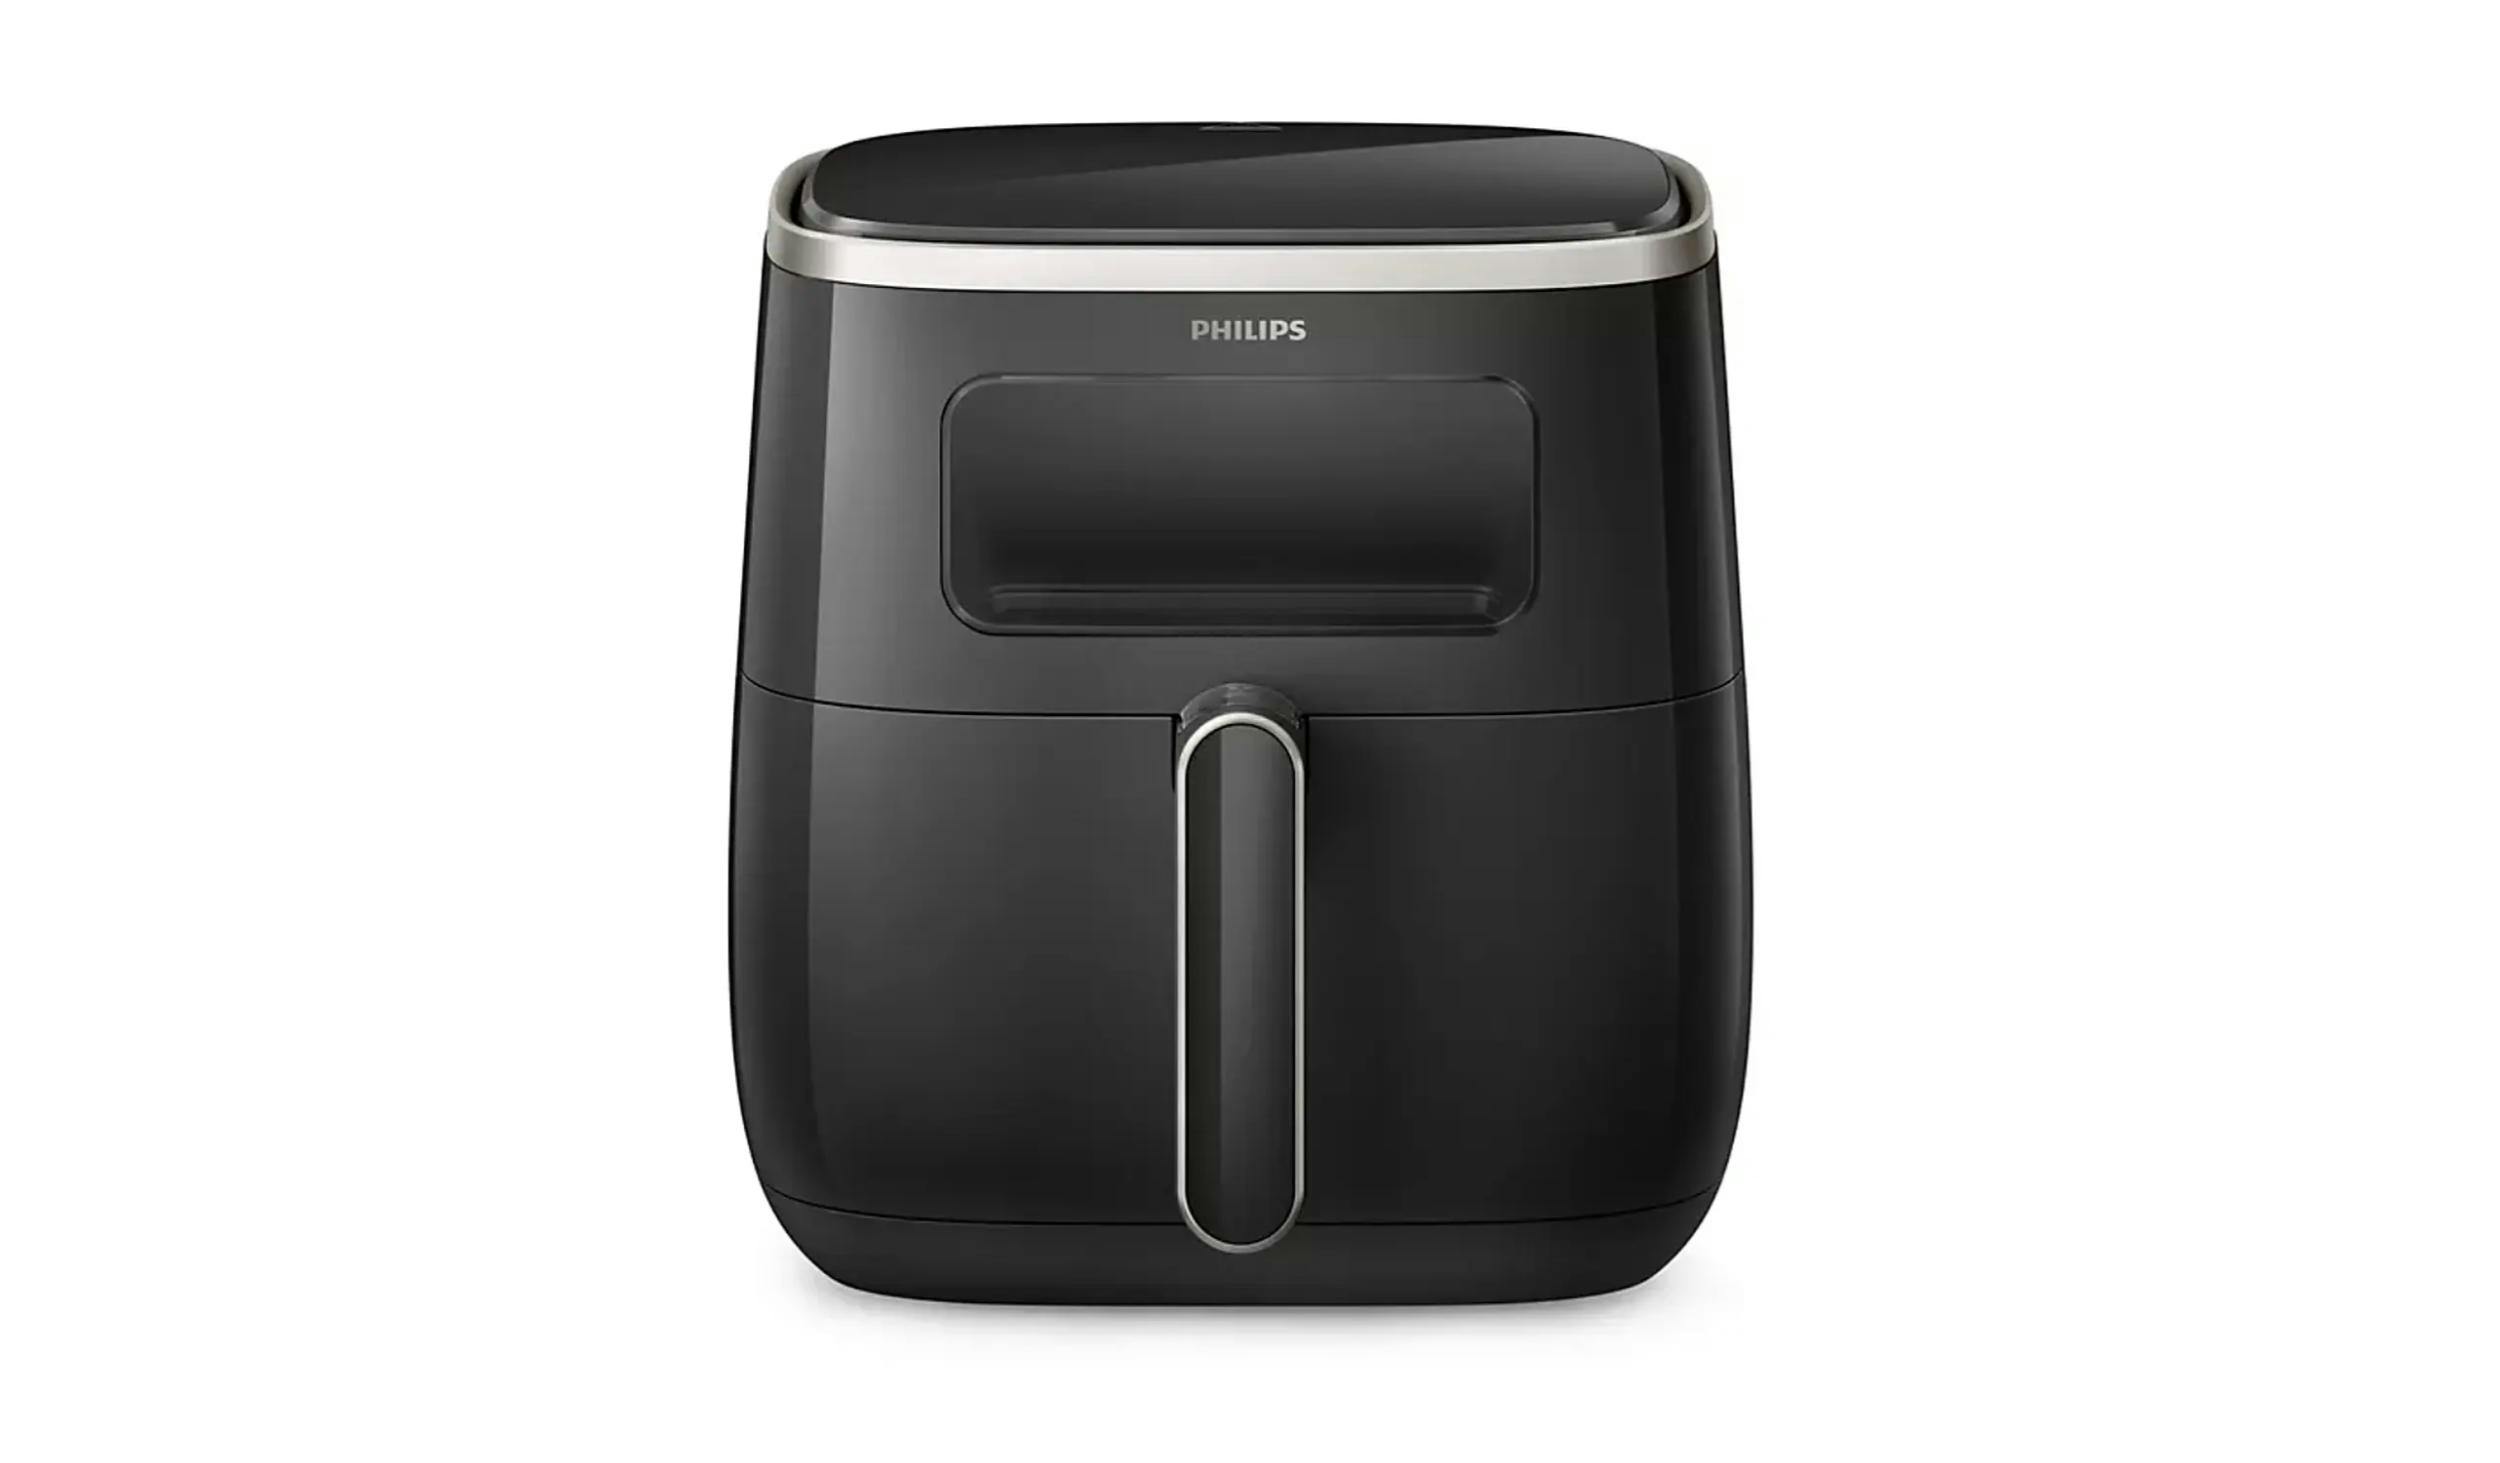 https://hnsgsfp.imgix.net/9/images/detailed/96/philips-airfryer-5.6l-with-digital-window-and-rapid-air-technology-black-hd9257-80_1.jpg?fit=fill&bg=0FFF&w=2500&h=1463&auto=format,compress